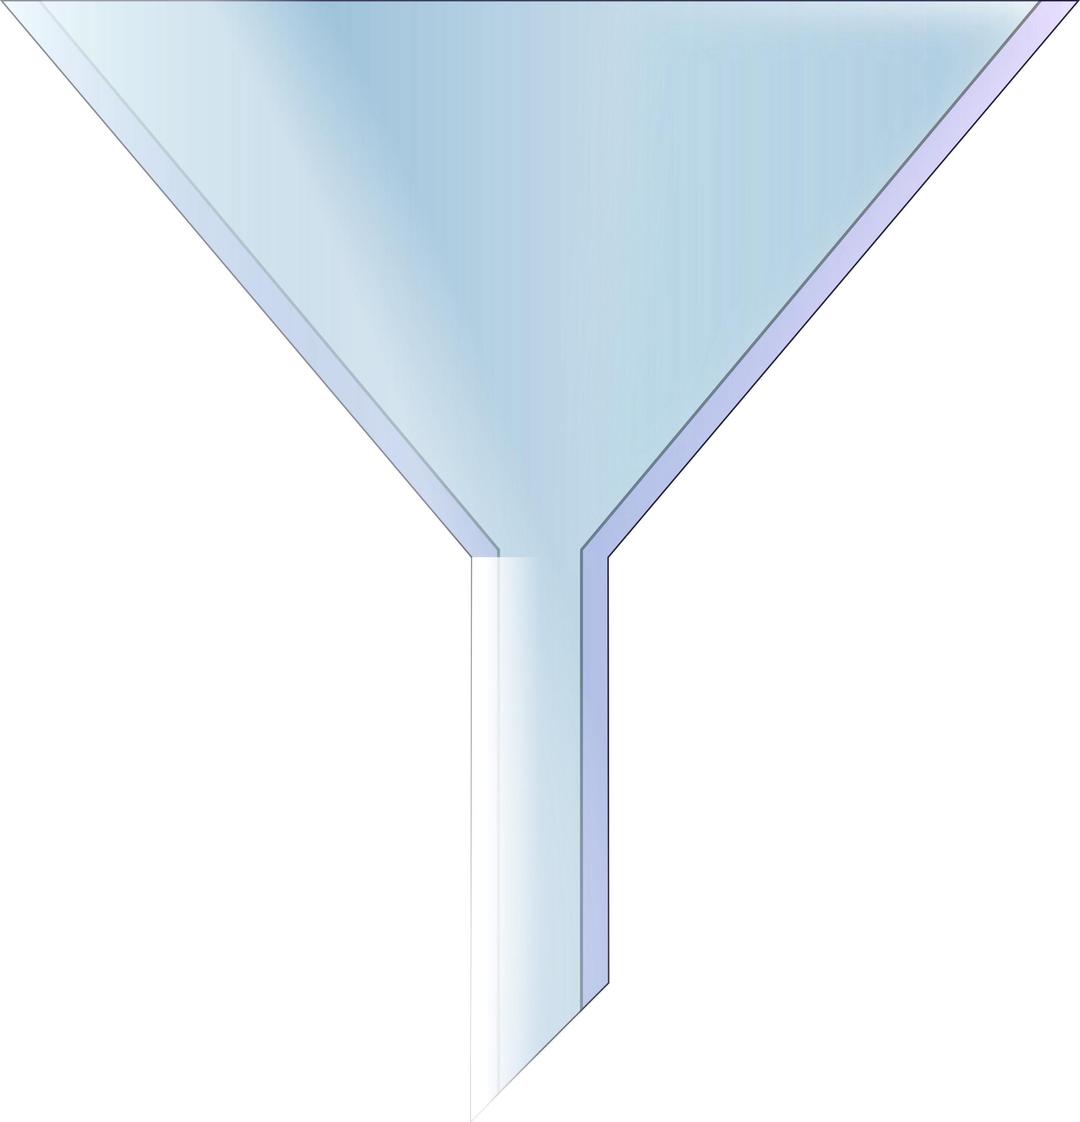 Laboratory conical funnel png transparent